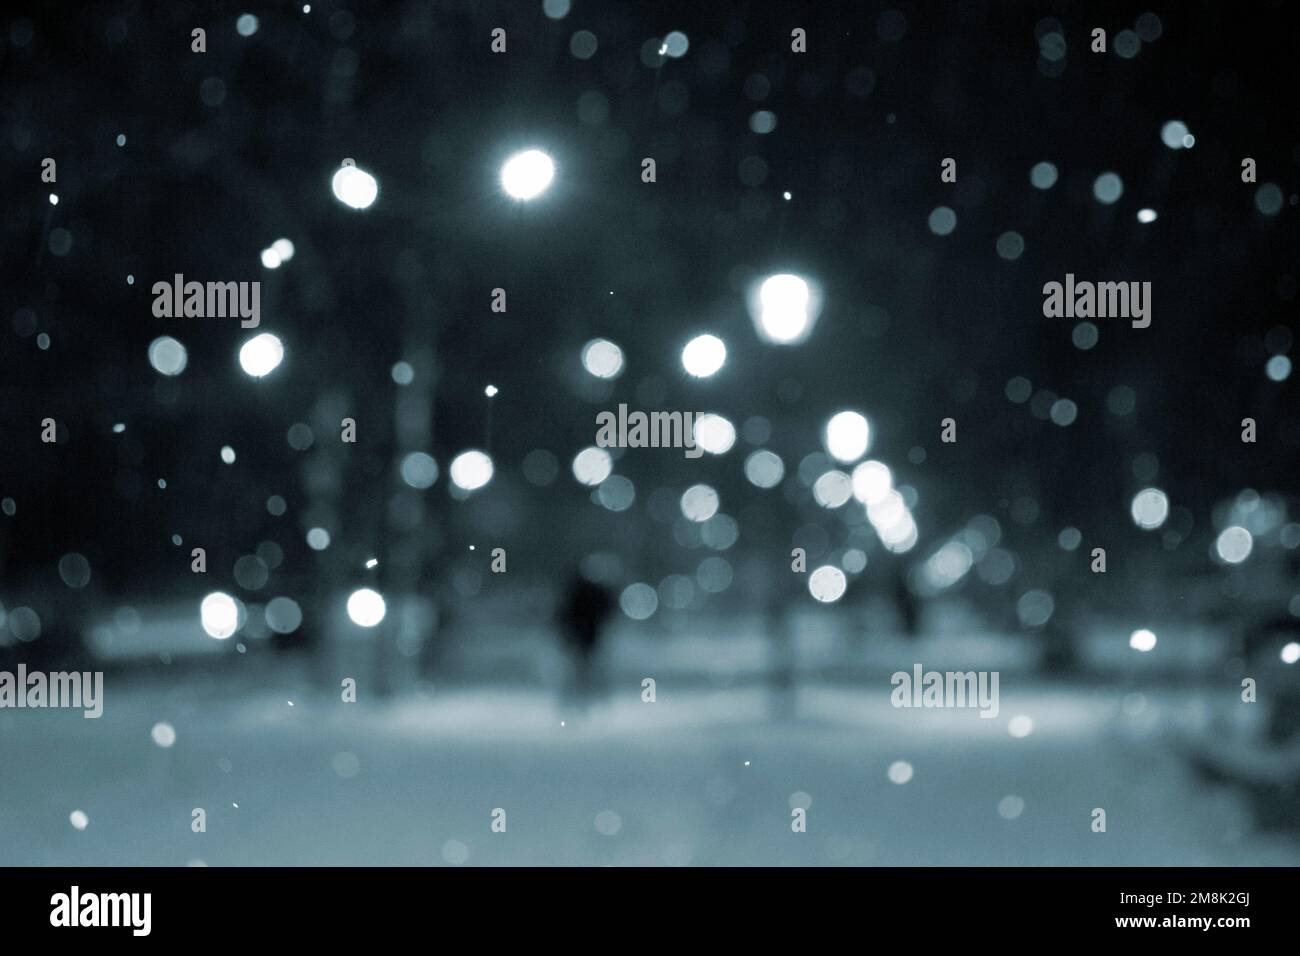 Blurred background. City view, lights, falling snow, night, street, bokeh spots. Urban backdrop winter scenery of street in city at night. Lantern light, snowfall. People. Blue color Stock Photo